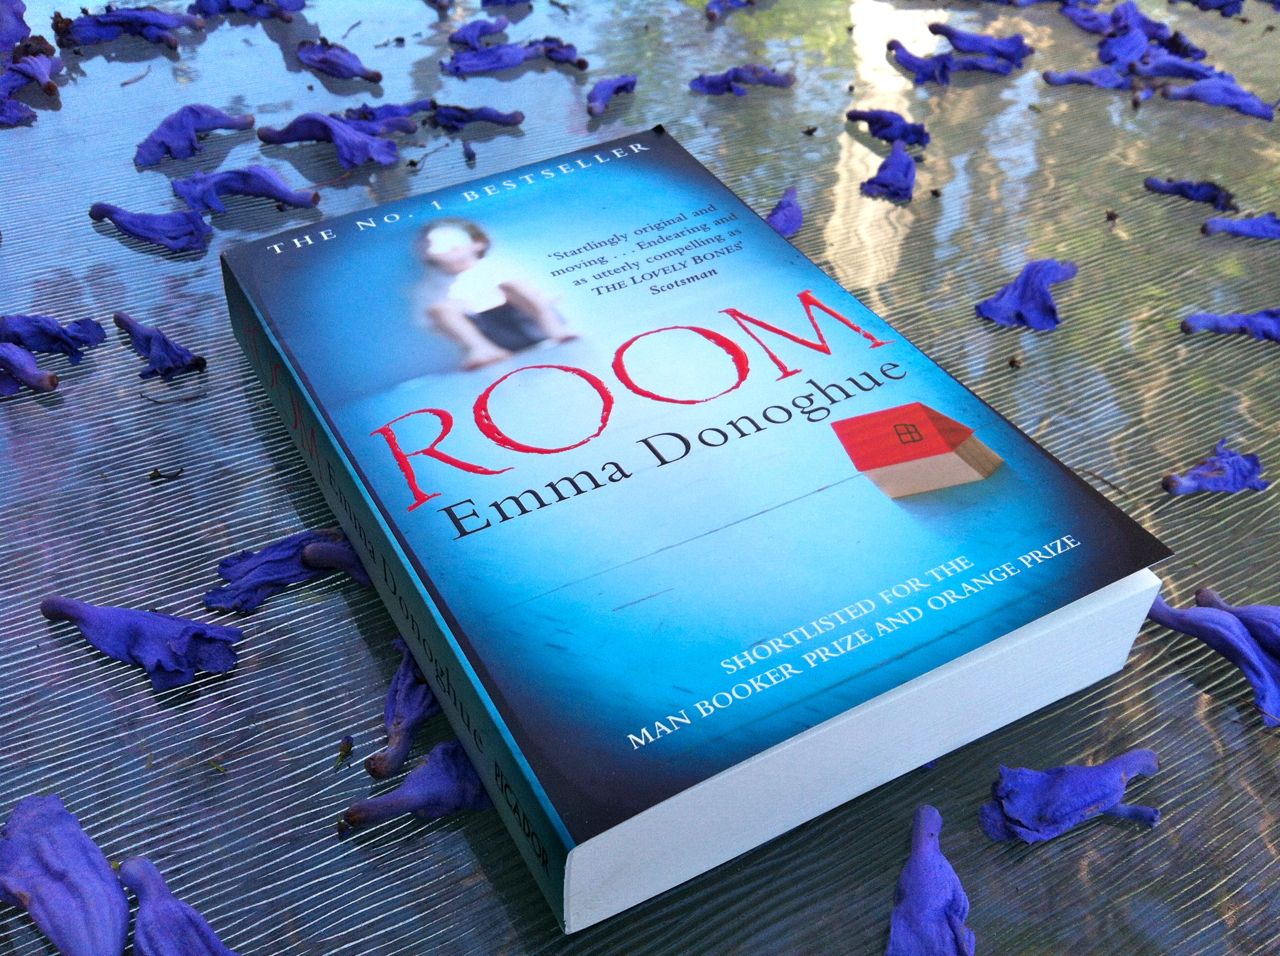 Room by Emma Donoghue and the trauma culture